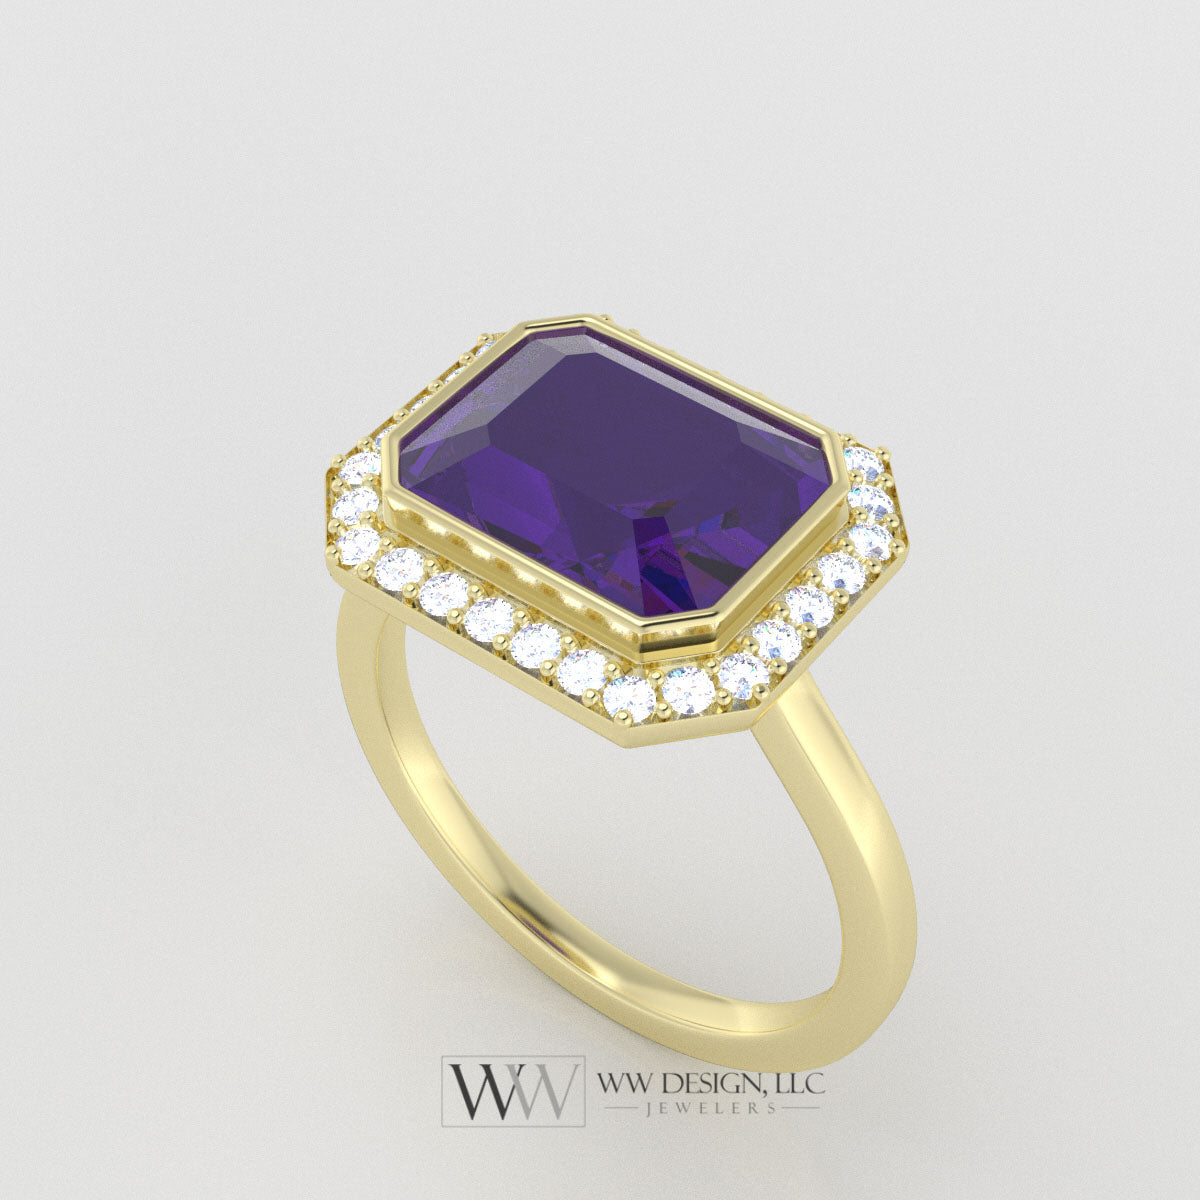 AAA Genuine 3.15ct Amethyst East West Emerald Shaped Ring with 0.28ctw Diamond Halo - 14k 18k Gold (Y, R,W) Platinum